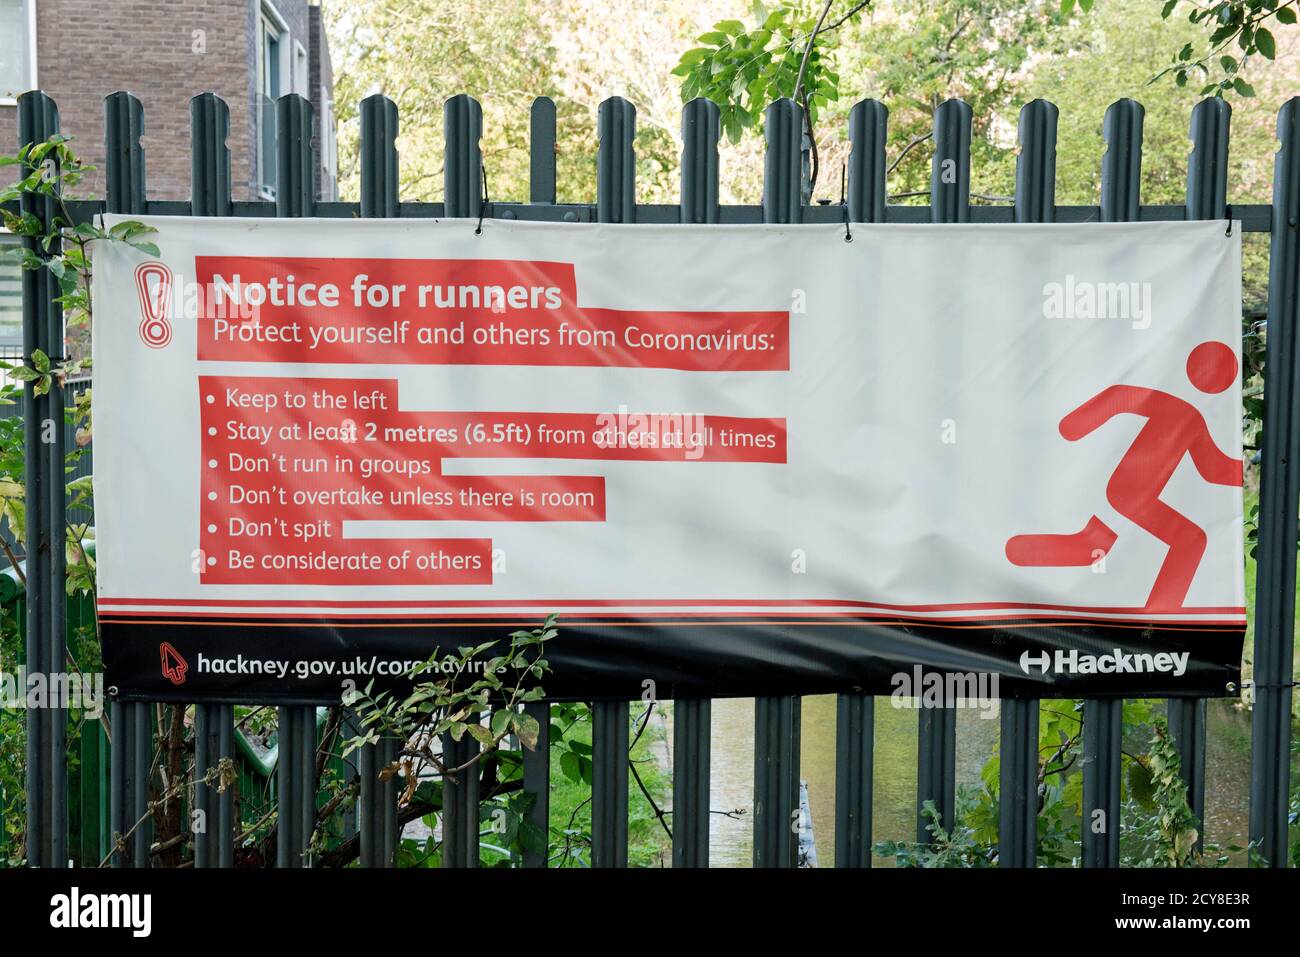 Notice for Runners sign or banner advising runners on protecting themself and others from Coronavirus Covid19, Woodberry Wetlands Stoke Newington London Stock Photo